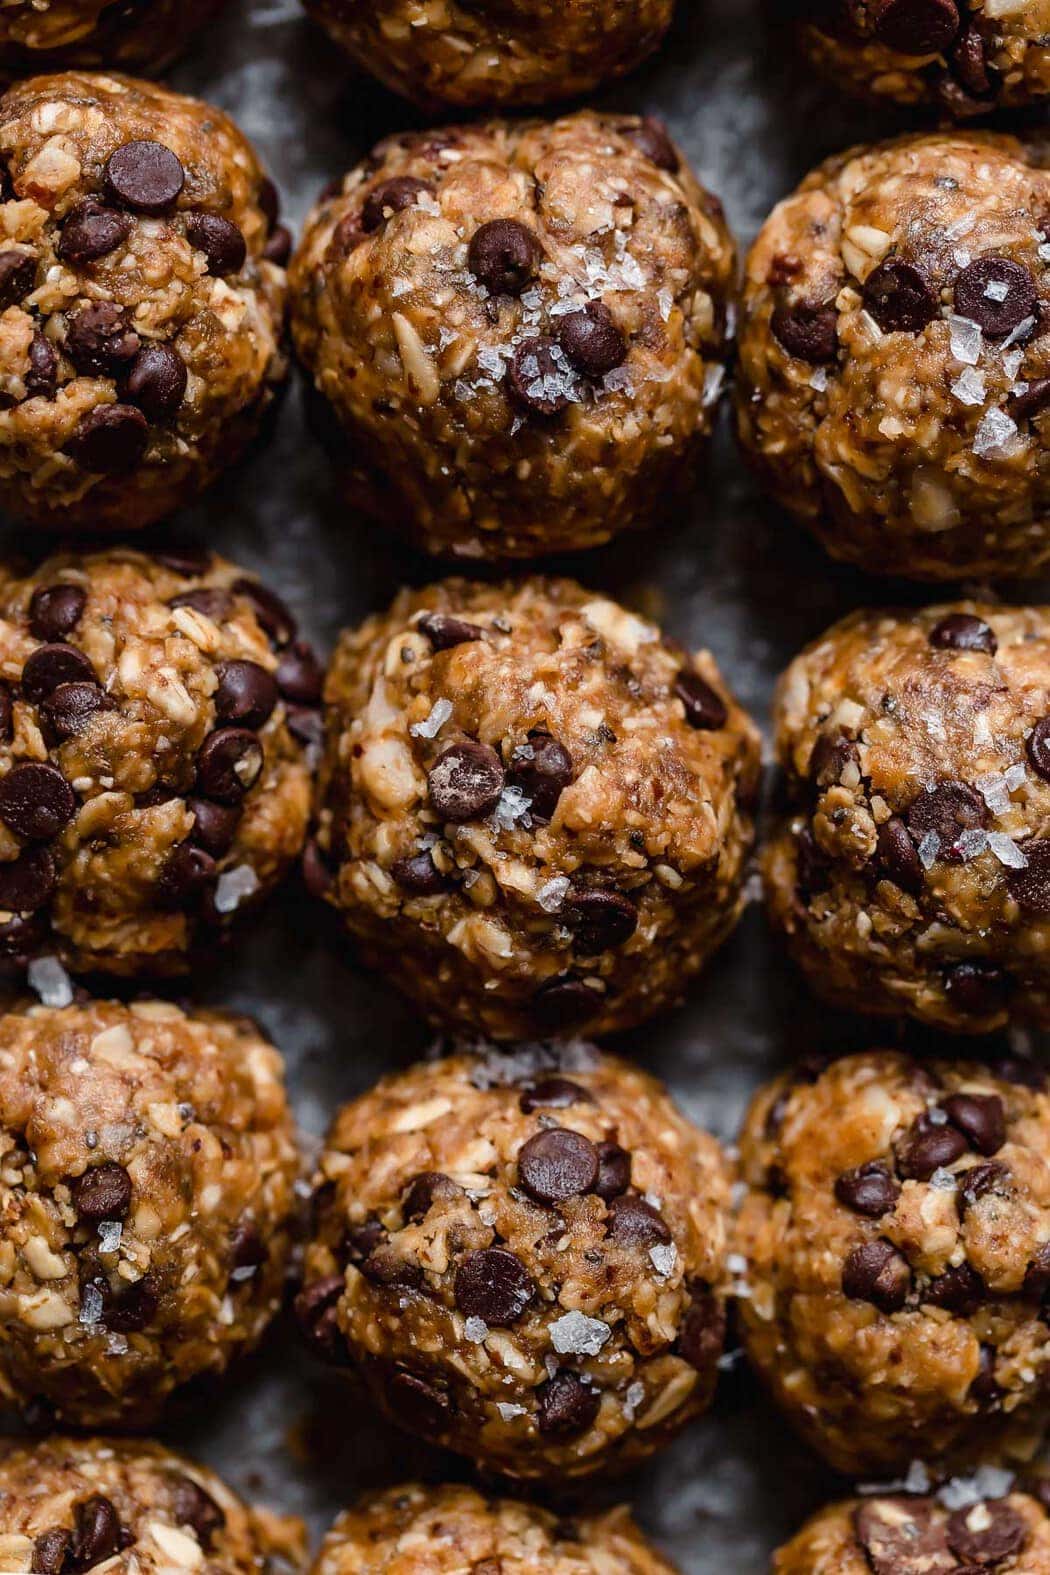 Peanut Butter Oatmeal Balls lined packed tightly in rows. Topped with flakes of sea salt.